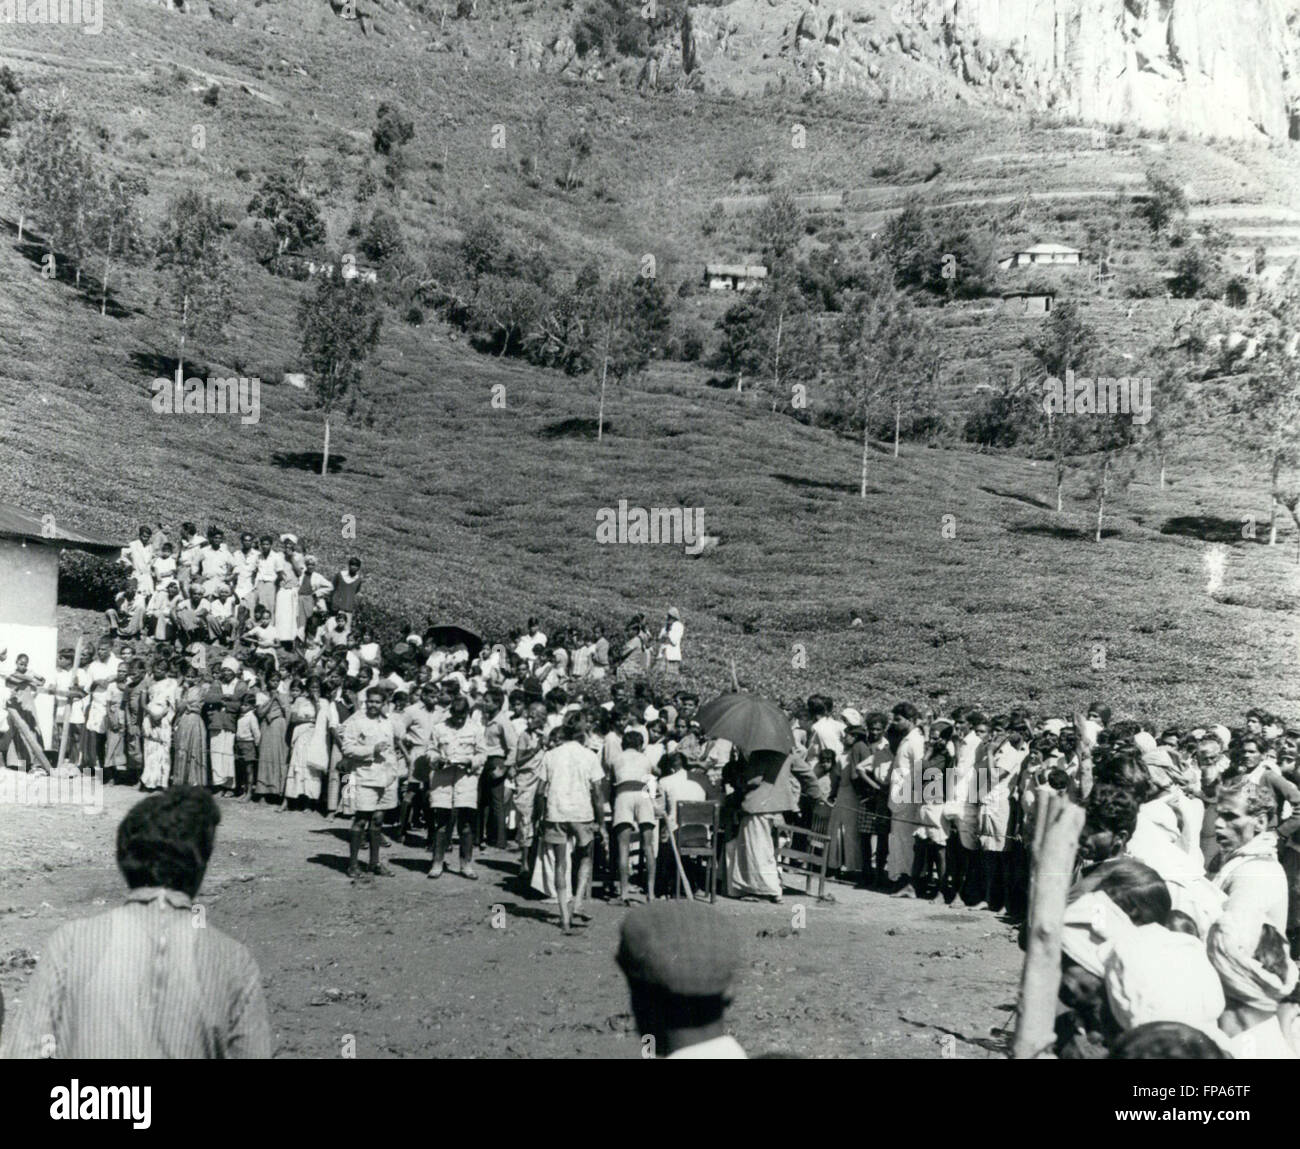 1962 - Twenty One Persons Killed In Plantation Landslide In Sri Lanka (Ceylon): Tragedy struck the tea growing district of Ragala, in Central Sri Lanka, recently when a landslide occurred on Liddlesdale Tea Estate, completely covering a Cooperative store and burying alive 21 persons who were buying their weekly food rations at that time. Photo shows judicial officers, assisted by Police personnel, holding an inquest into the deaths. © Keystone Pictures USA/ZUMAPRESS.com/Alamy Live News Stock Photo